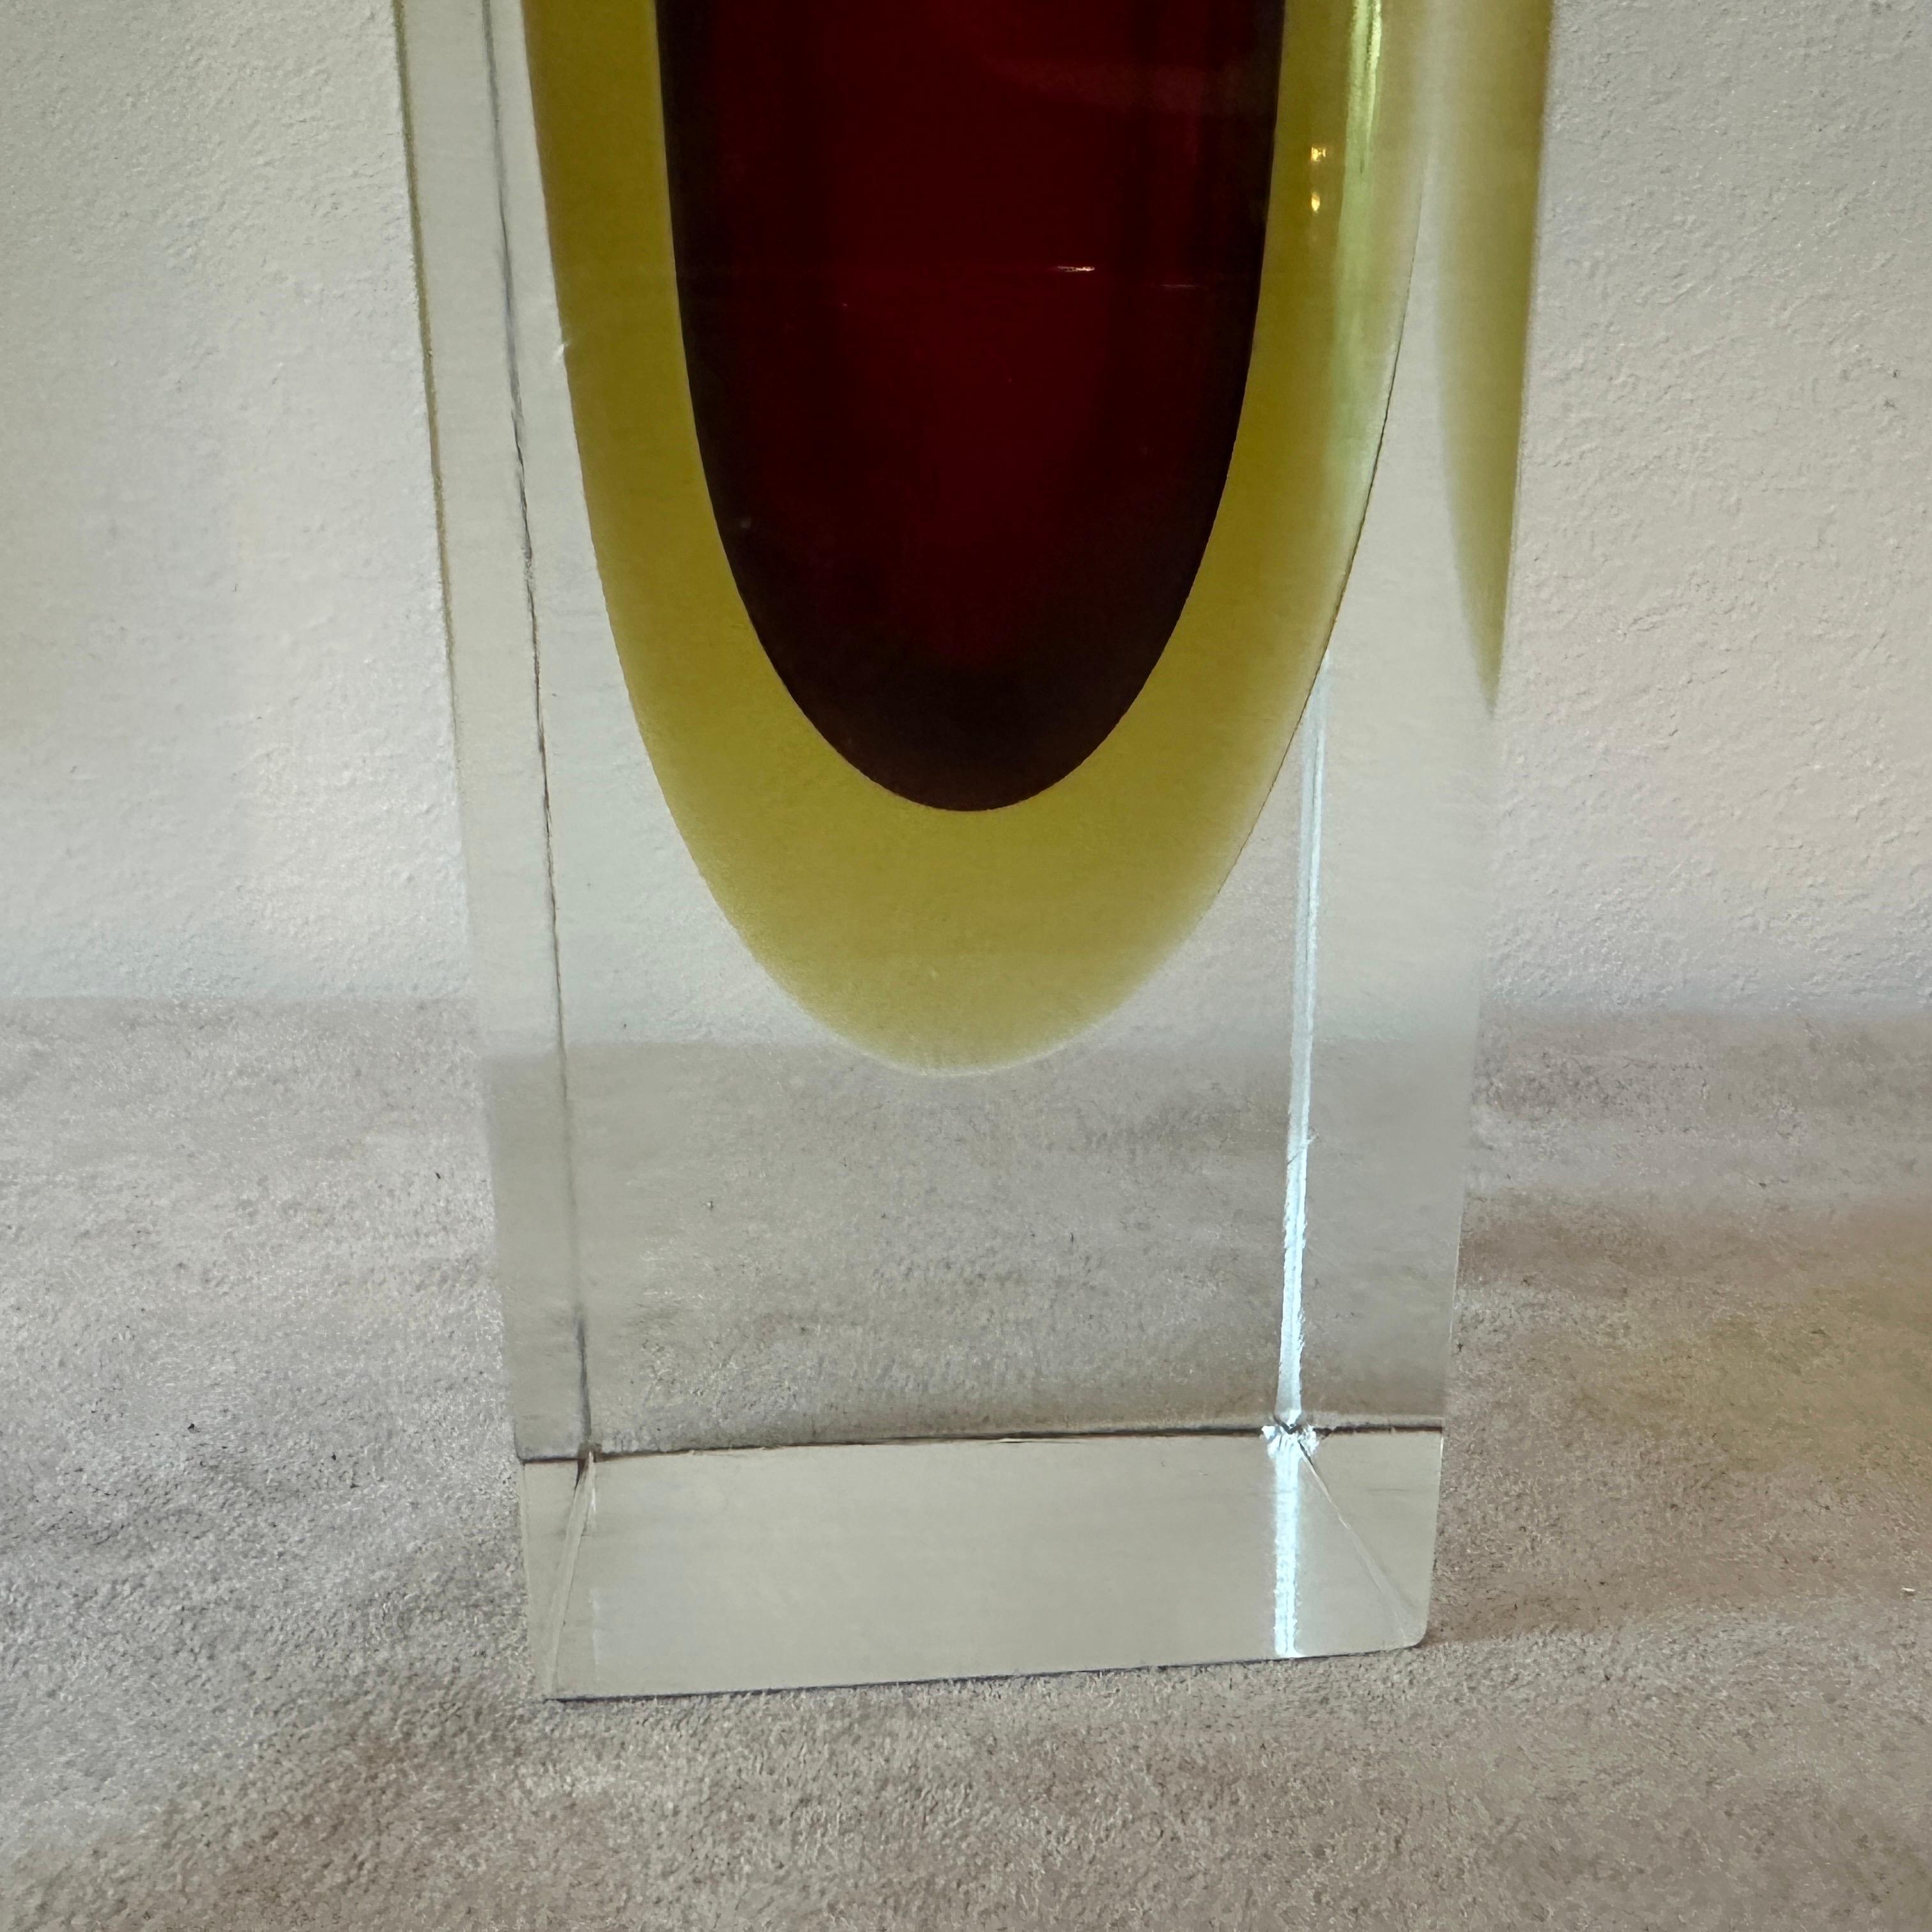 1960s, Modernist Red and Yellow Sommerso Murano Glass Square Vase by Seguso For Sale 2